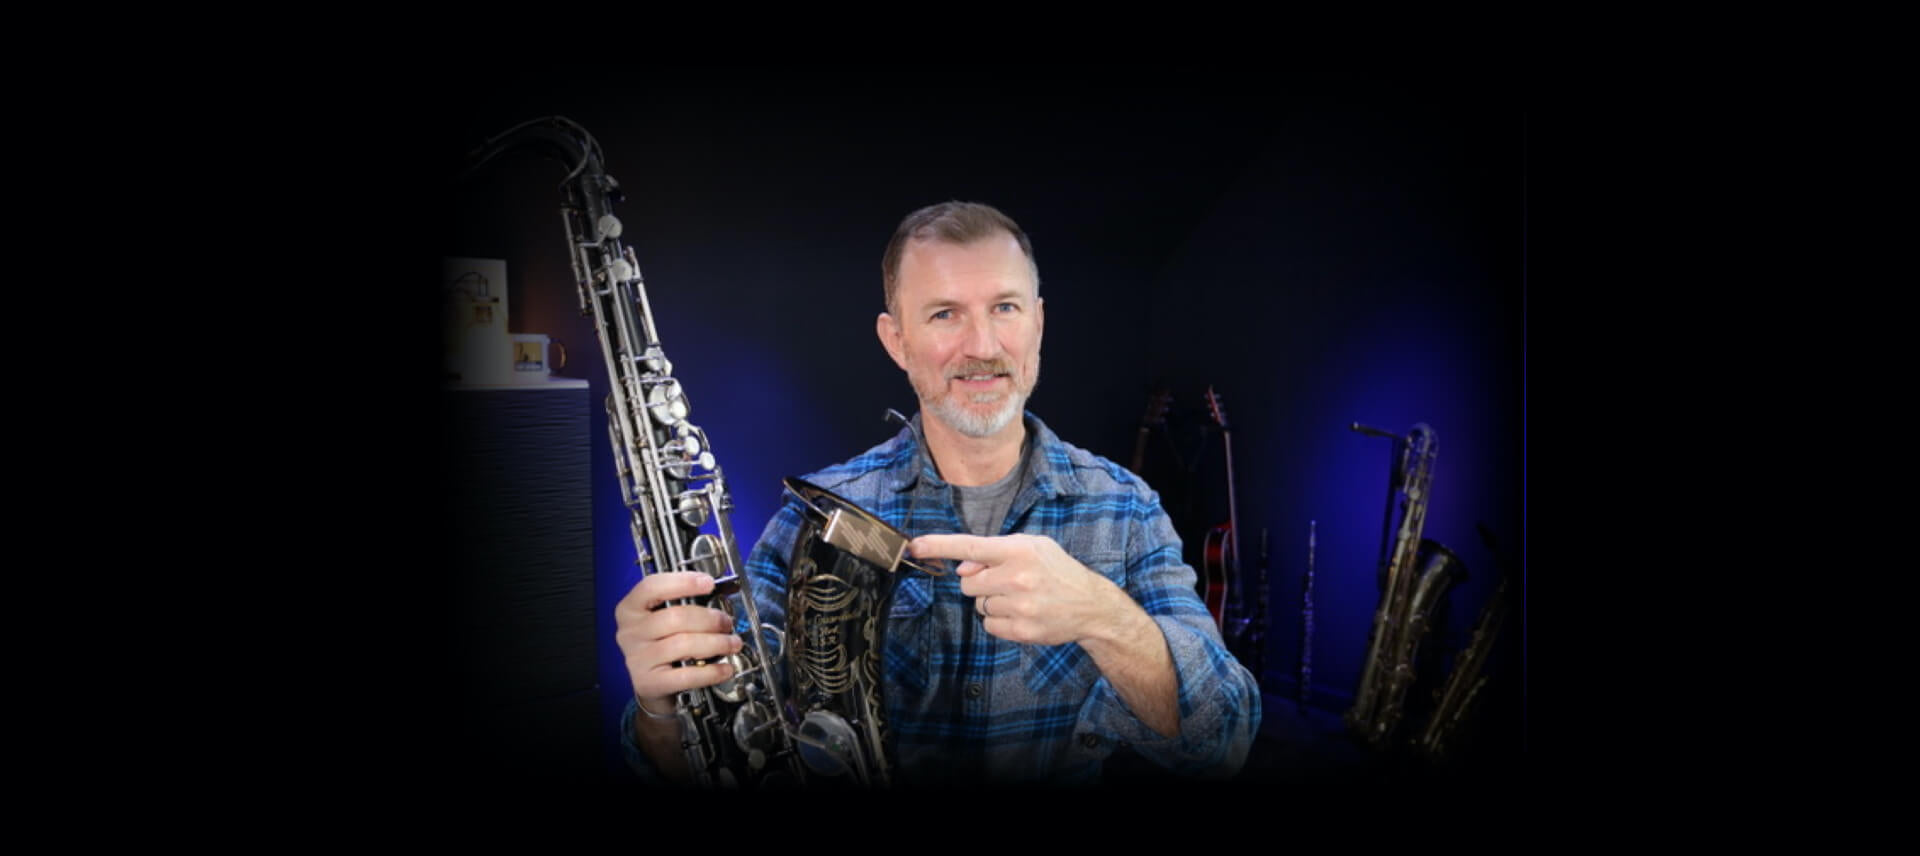 Product Review from McGill Sax School